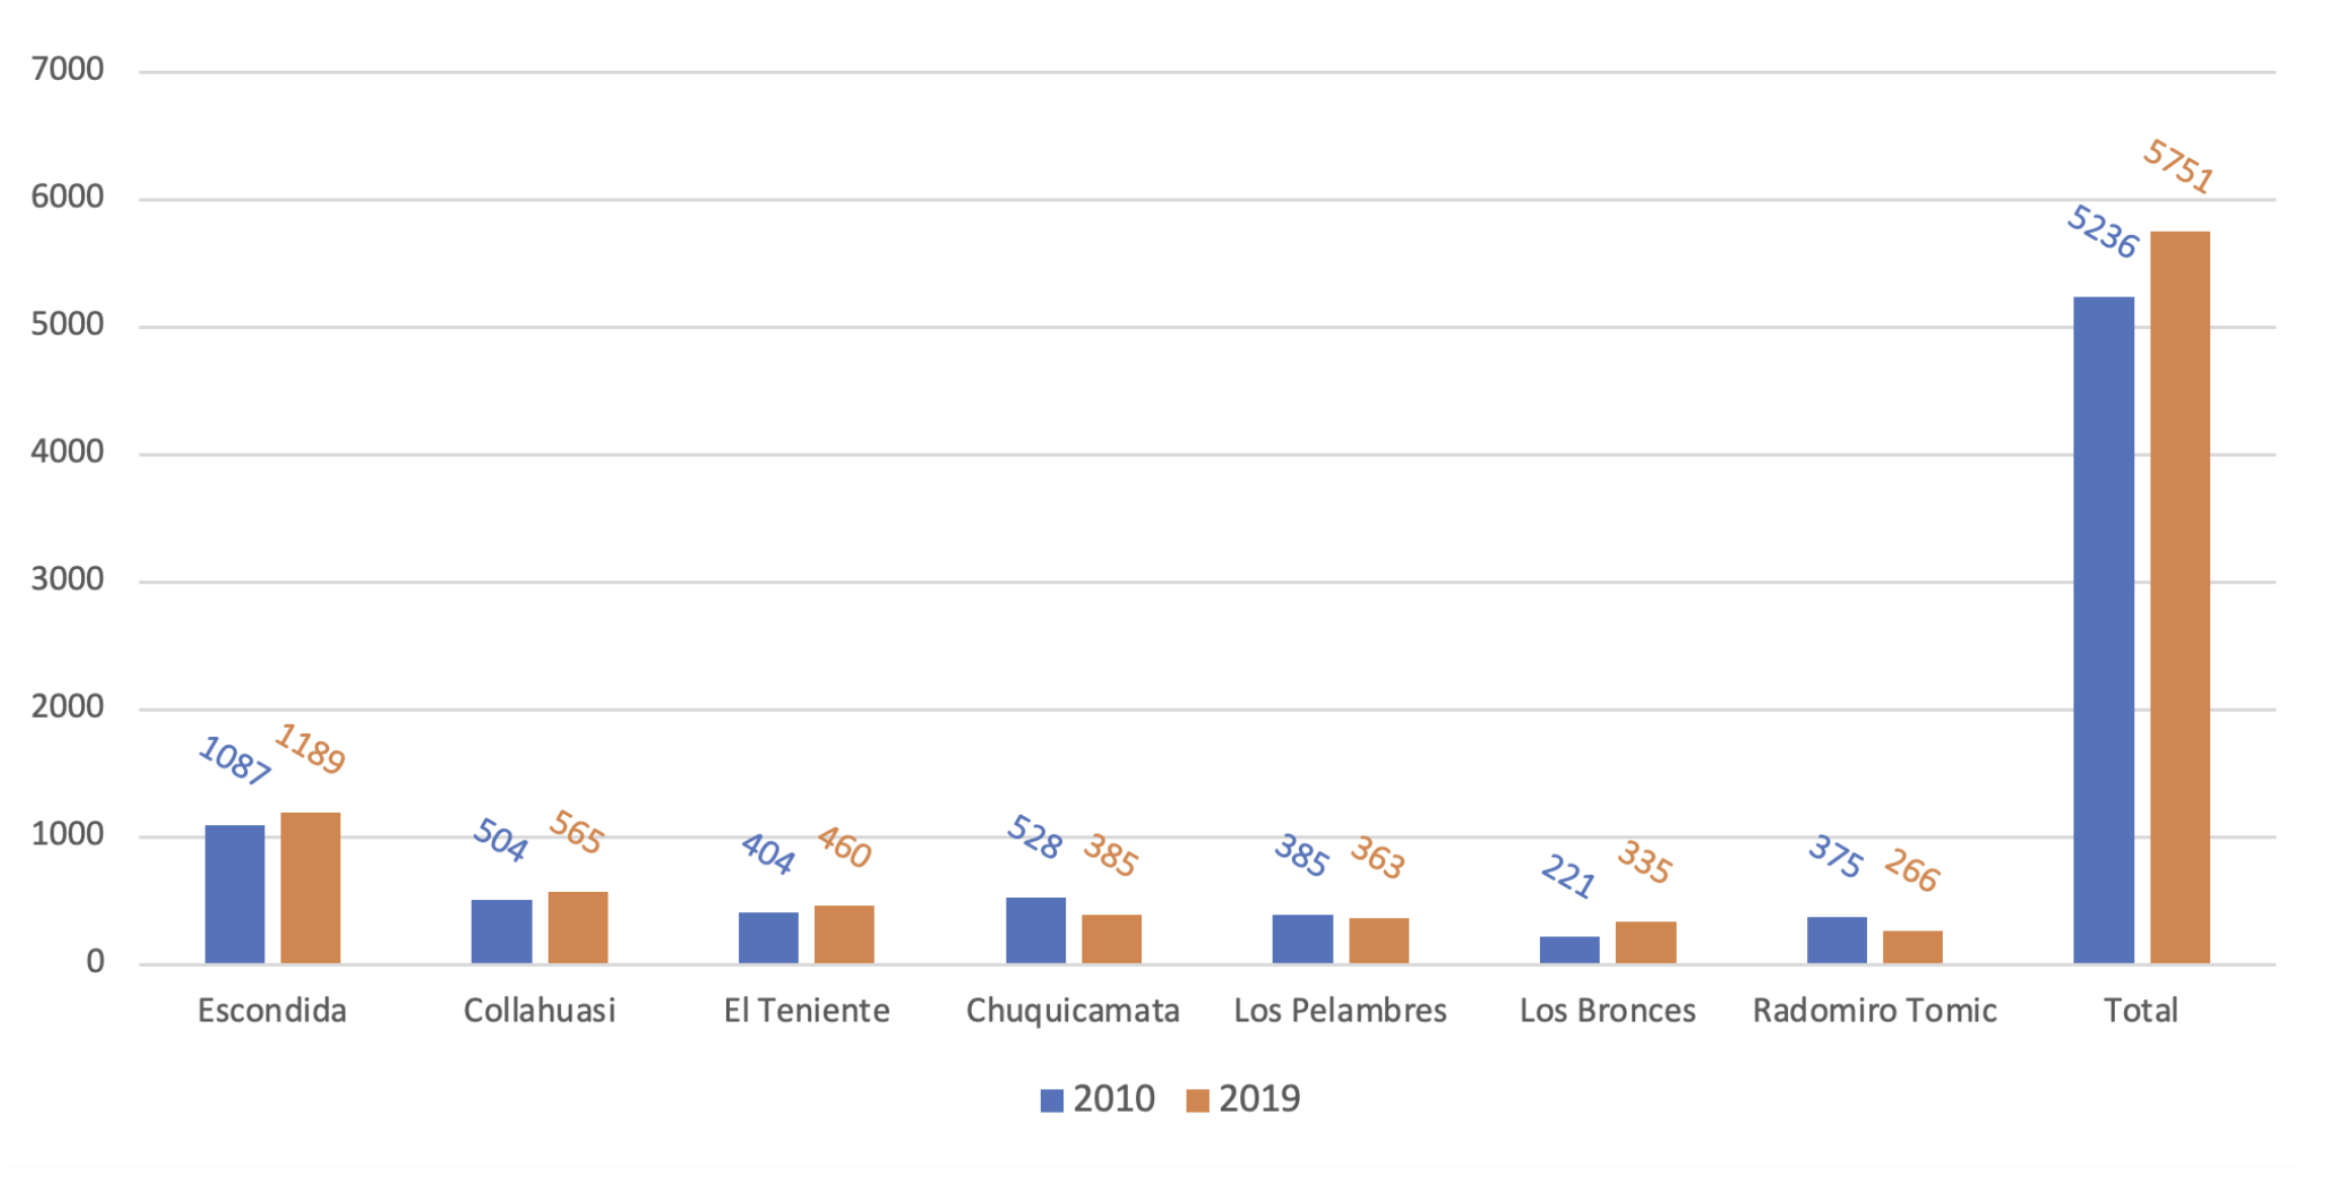 Figure 1 — Chile's Copper Production by Largest Mines, 2010 and 2019 (in '000 Metric Tons)